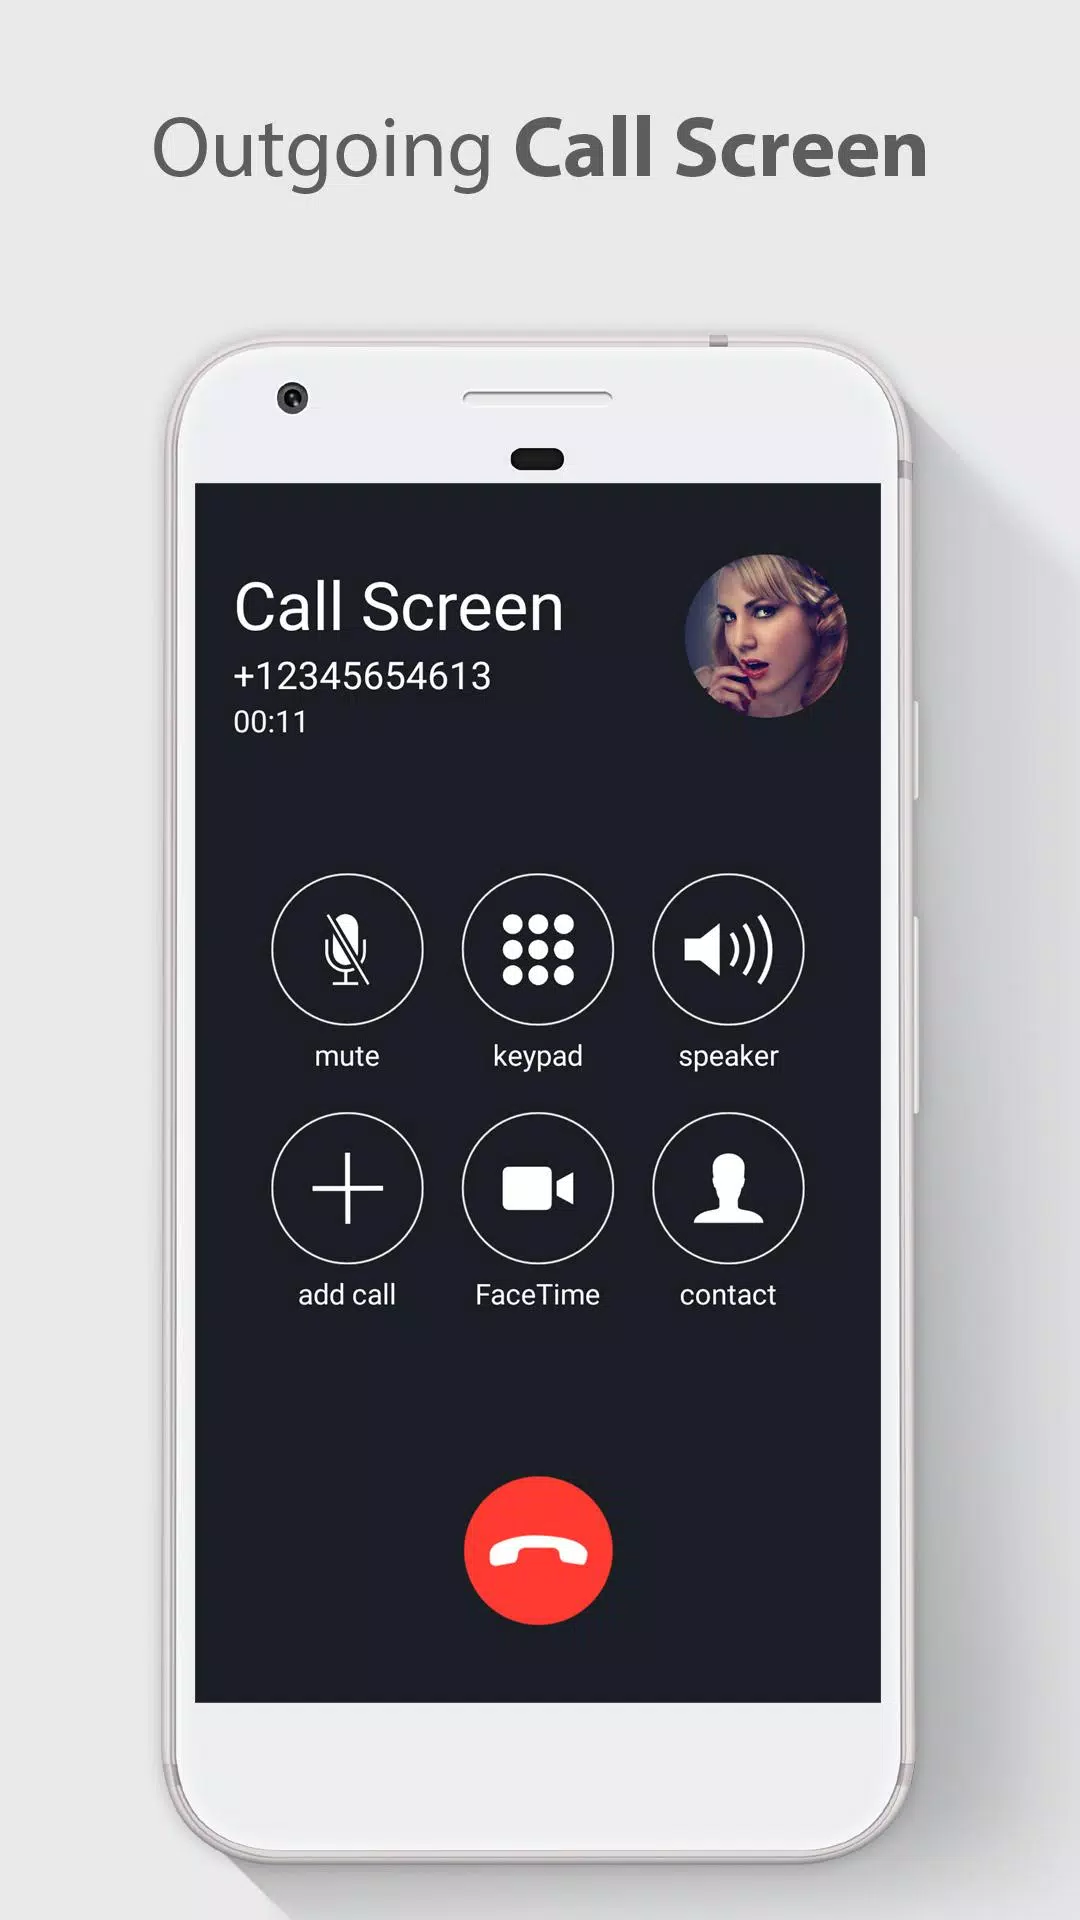 HD Phone 8 i Call Screen OS11 for Android - APK Download